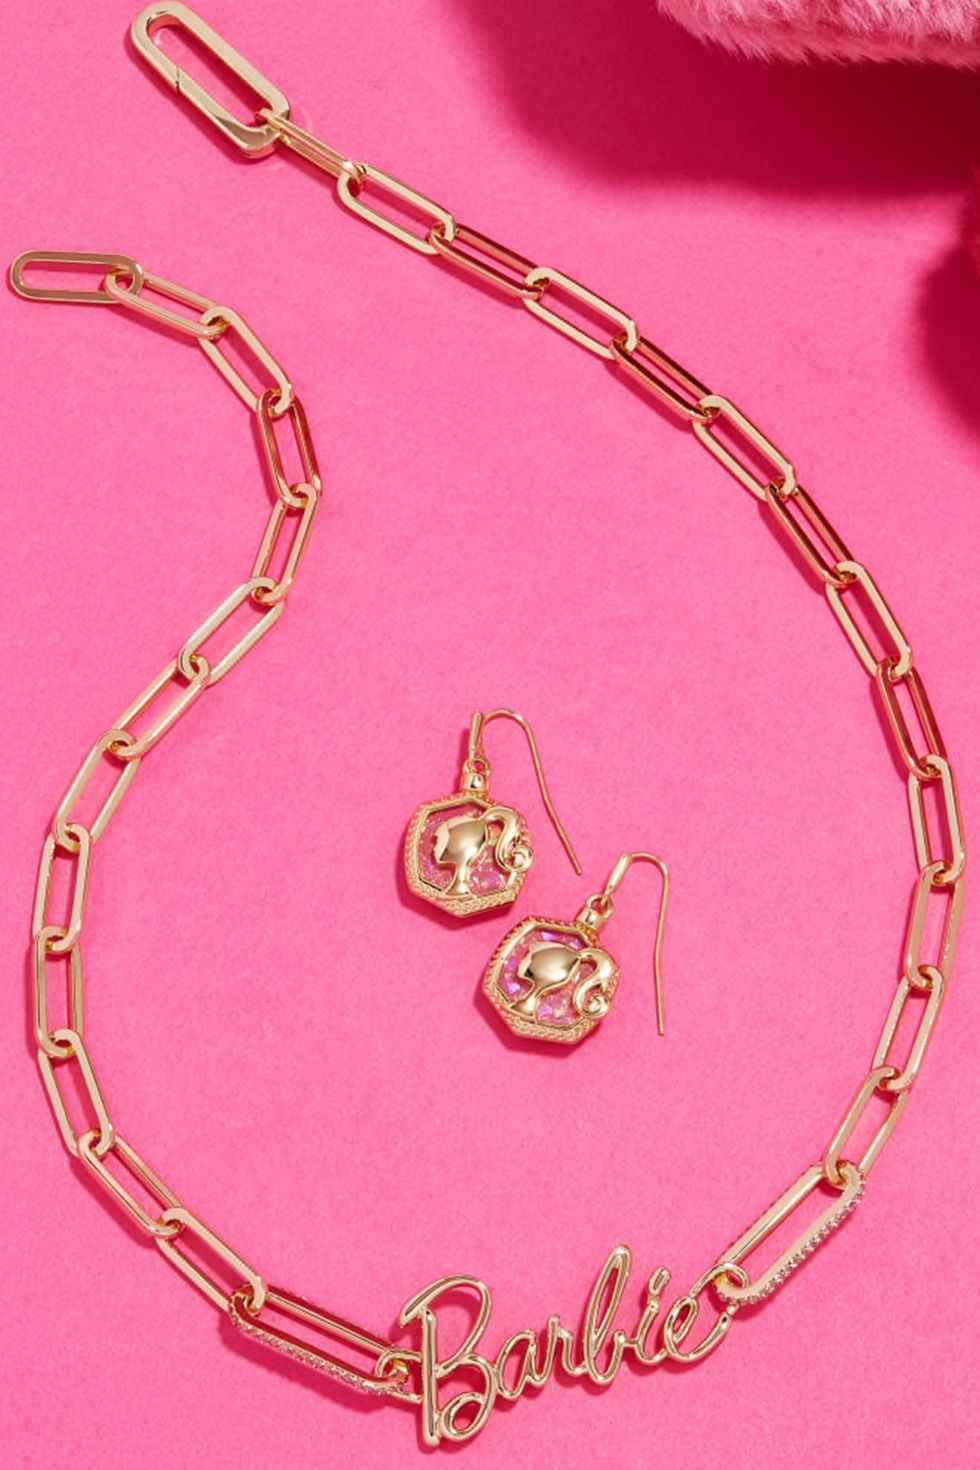 Kendra Scott x Barbie Gold Link and Chain Necklace